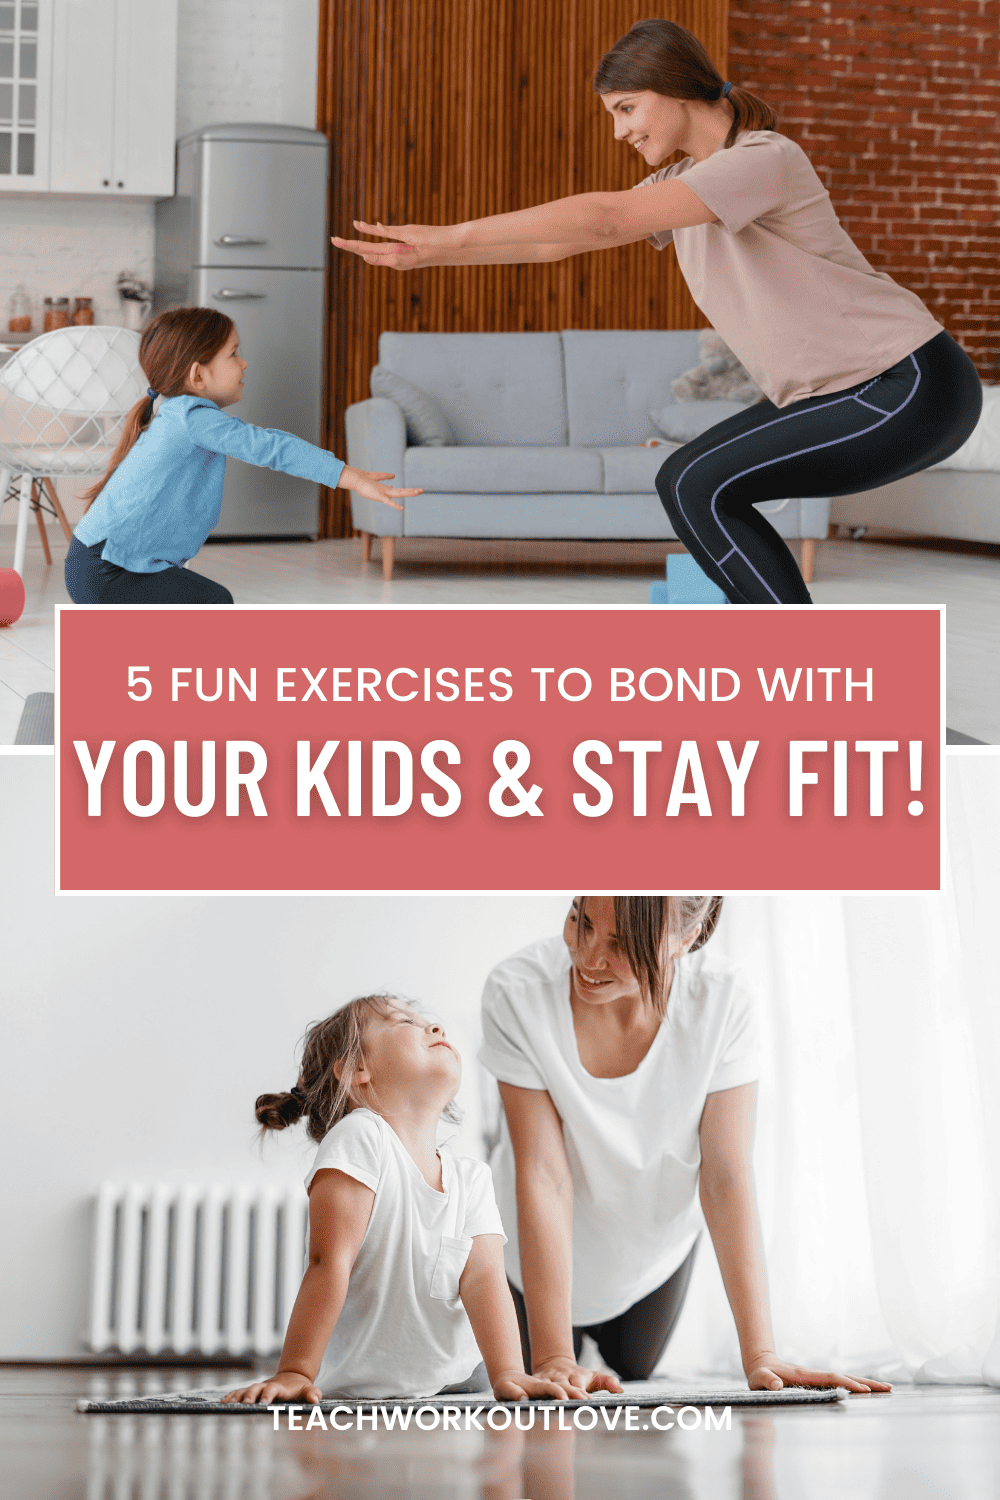 Get your kids moving and stay fit with these 5 fun exercises that parents can do with their children! From yoga poses to strength training drills, bond with your kids while staying healthy.